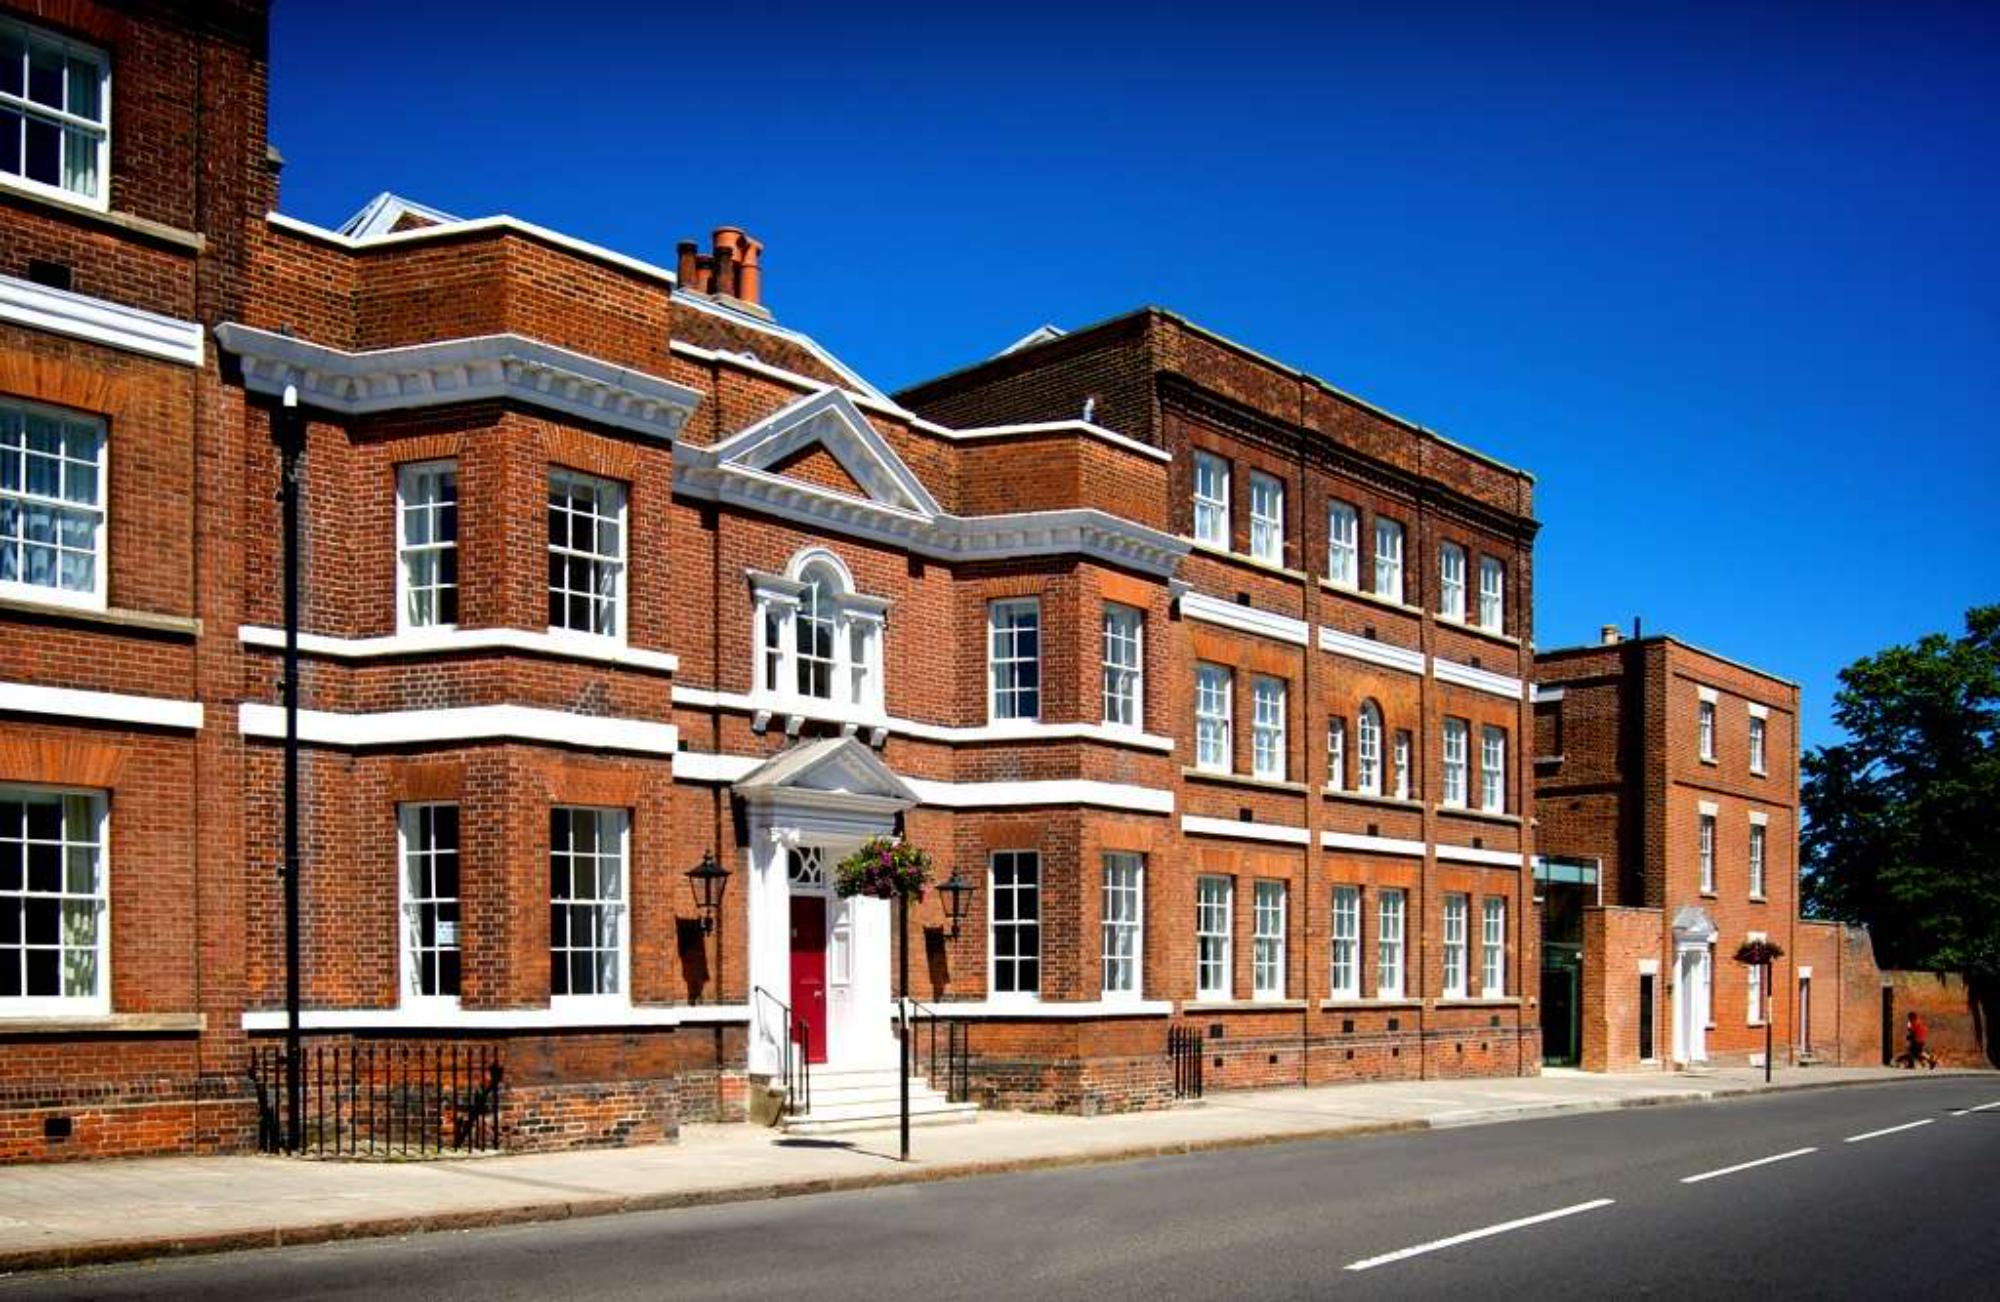 Hotels in Colchester holidays at Cool Places